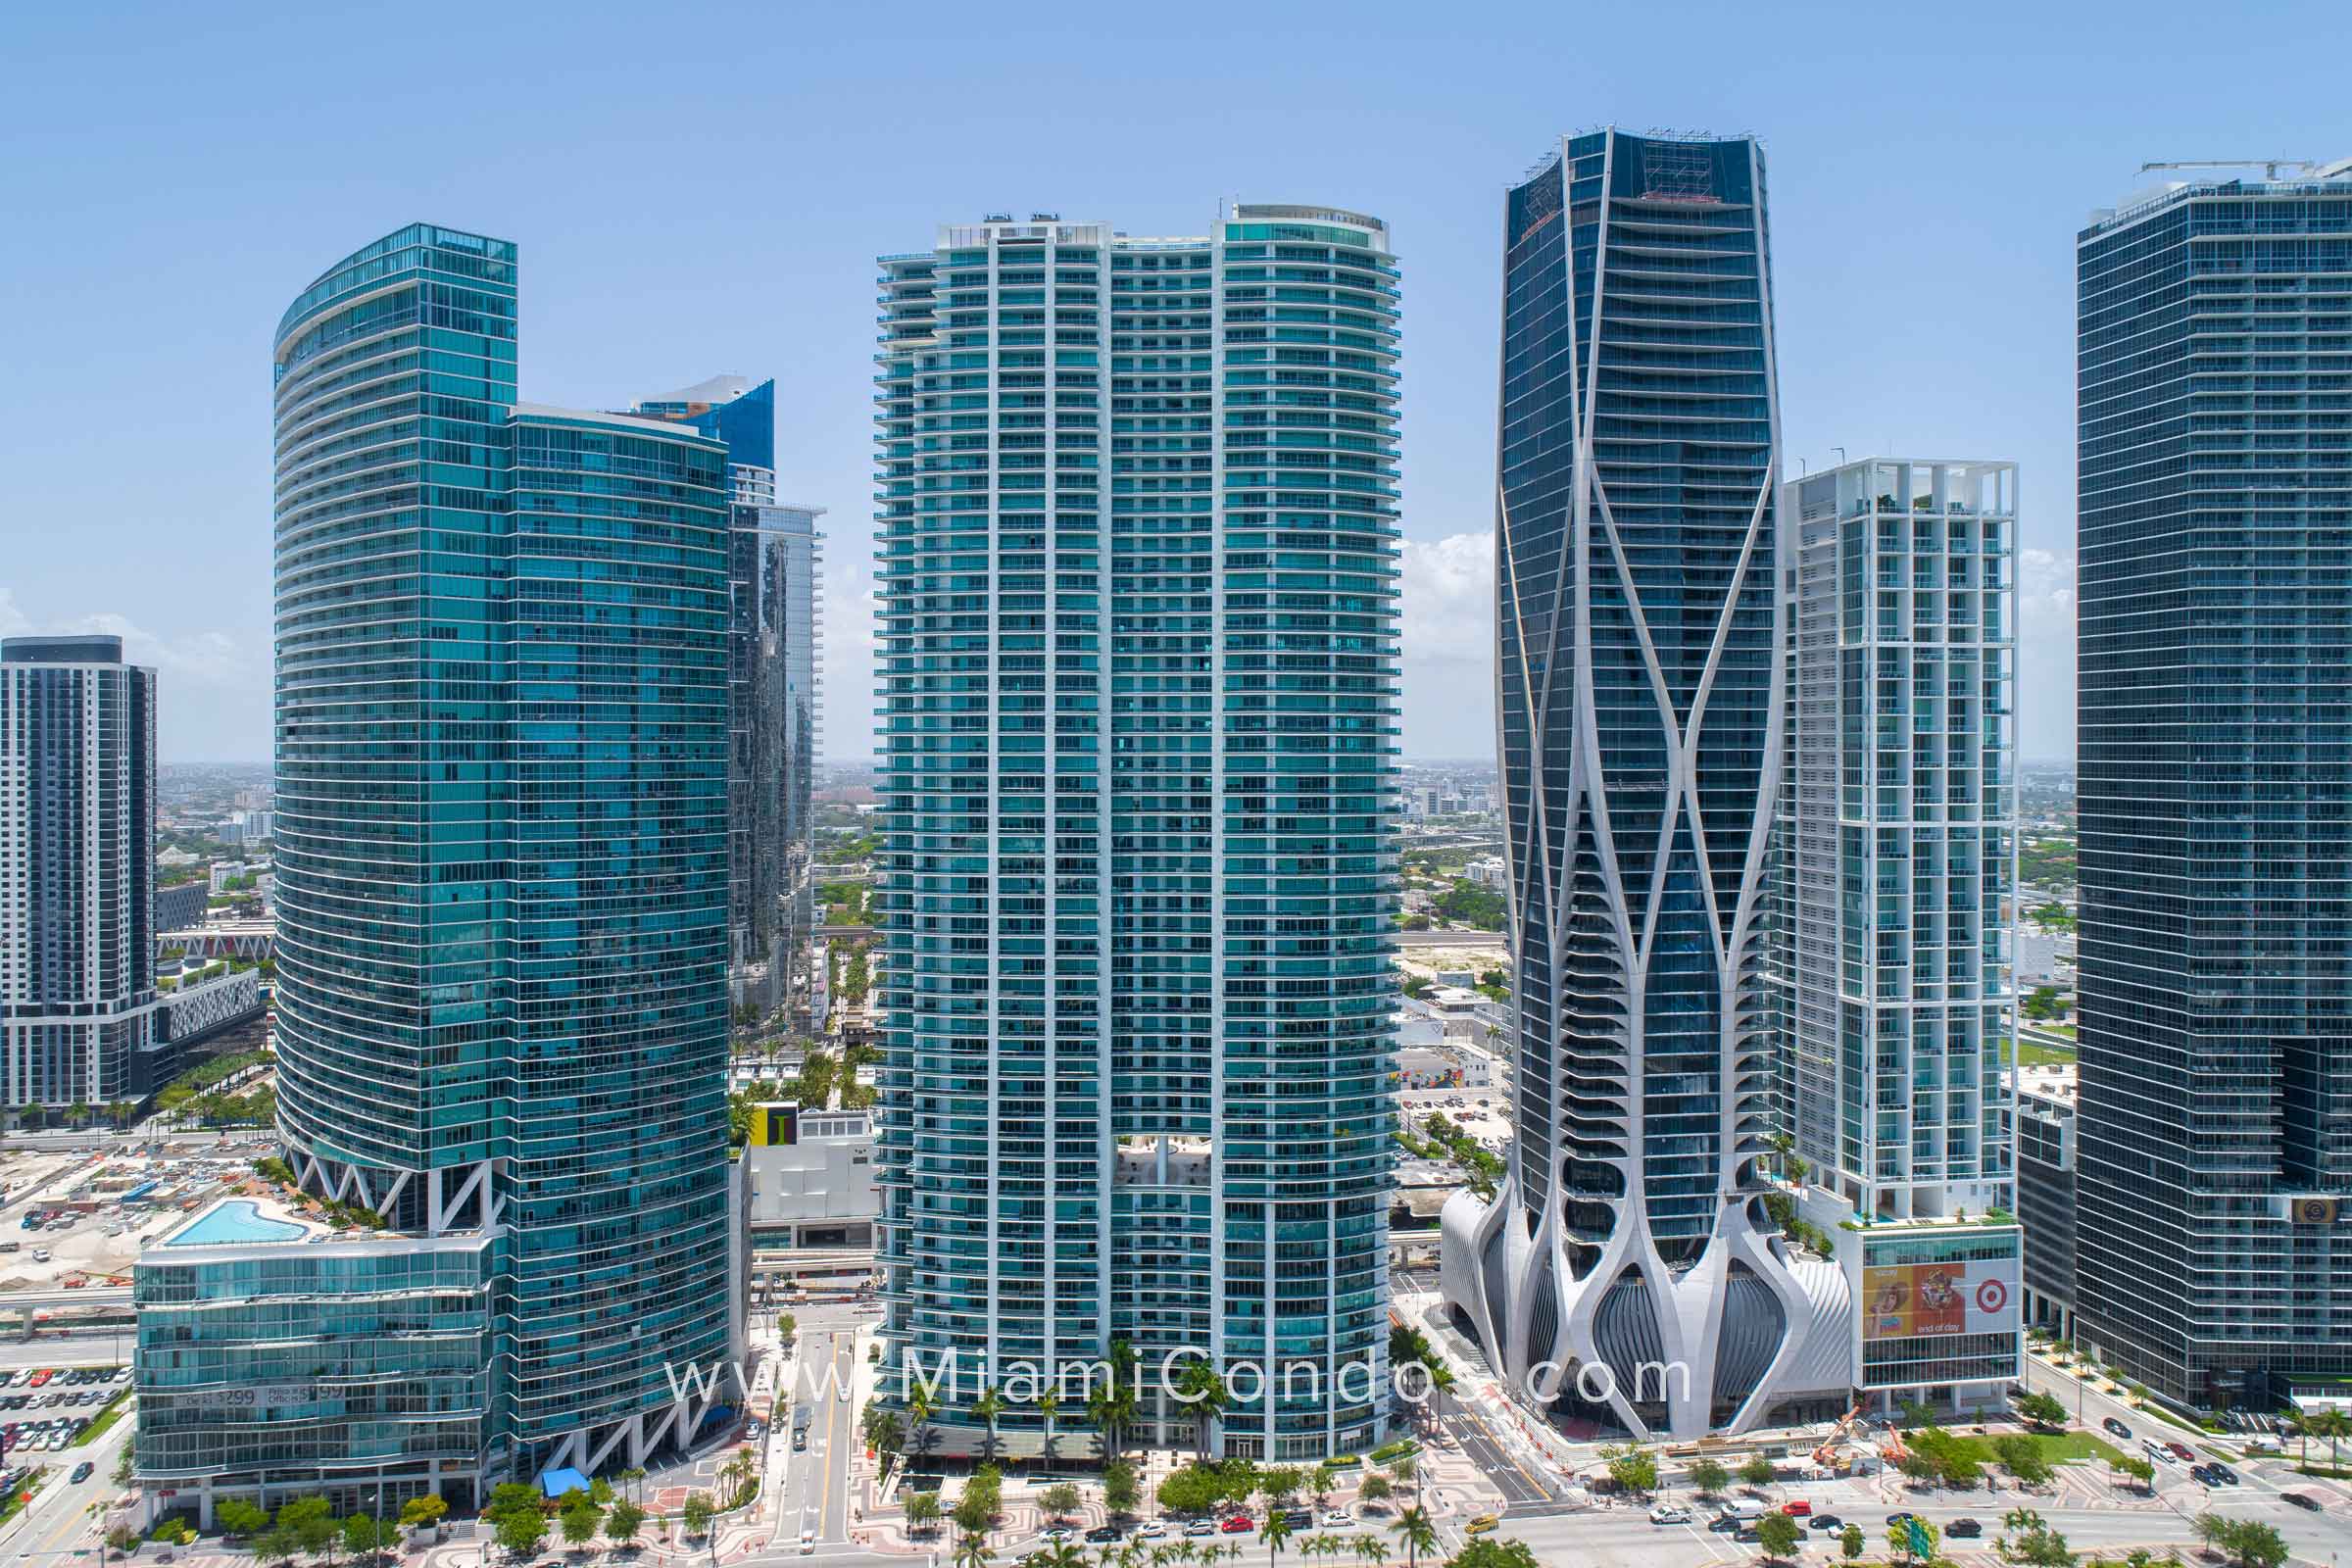 900 Biscayne Bay Condos in Downtown Miami